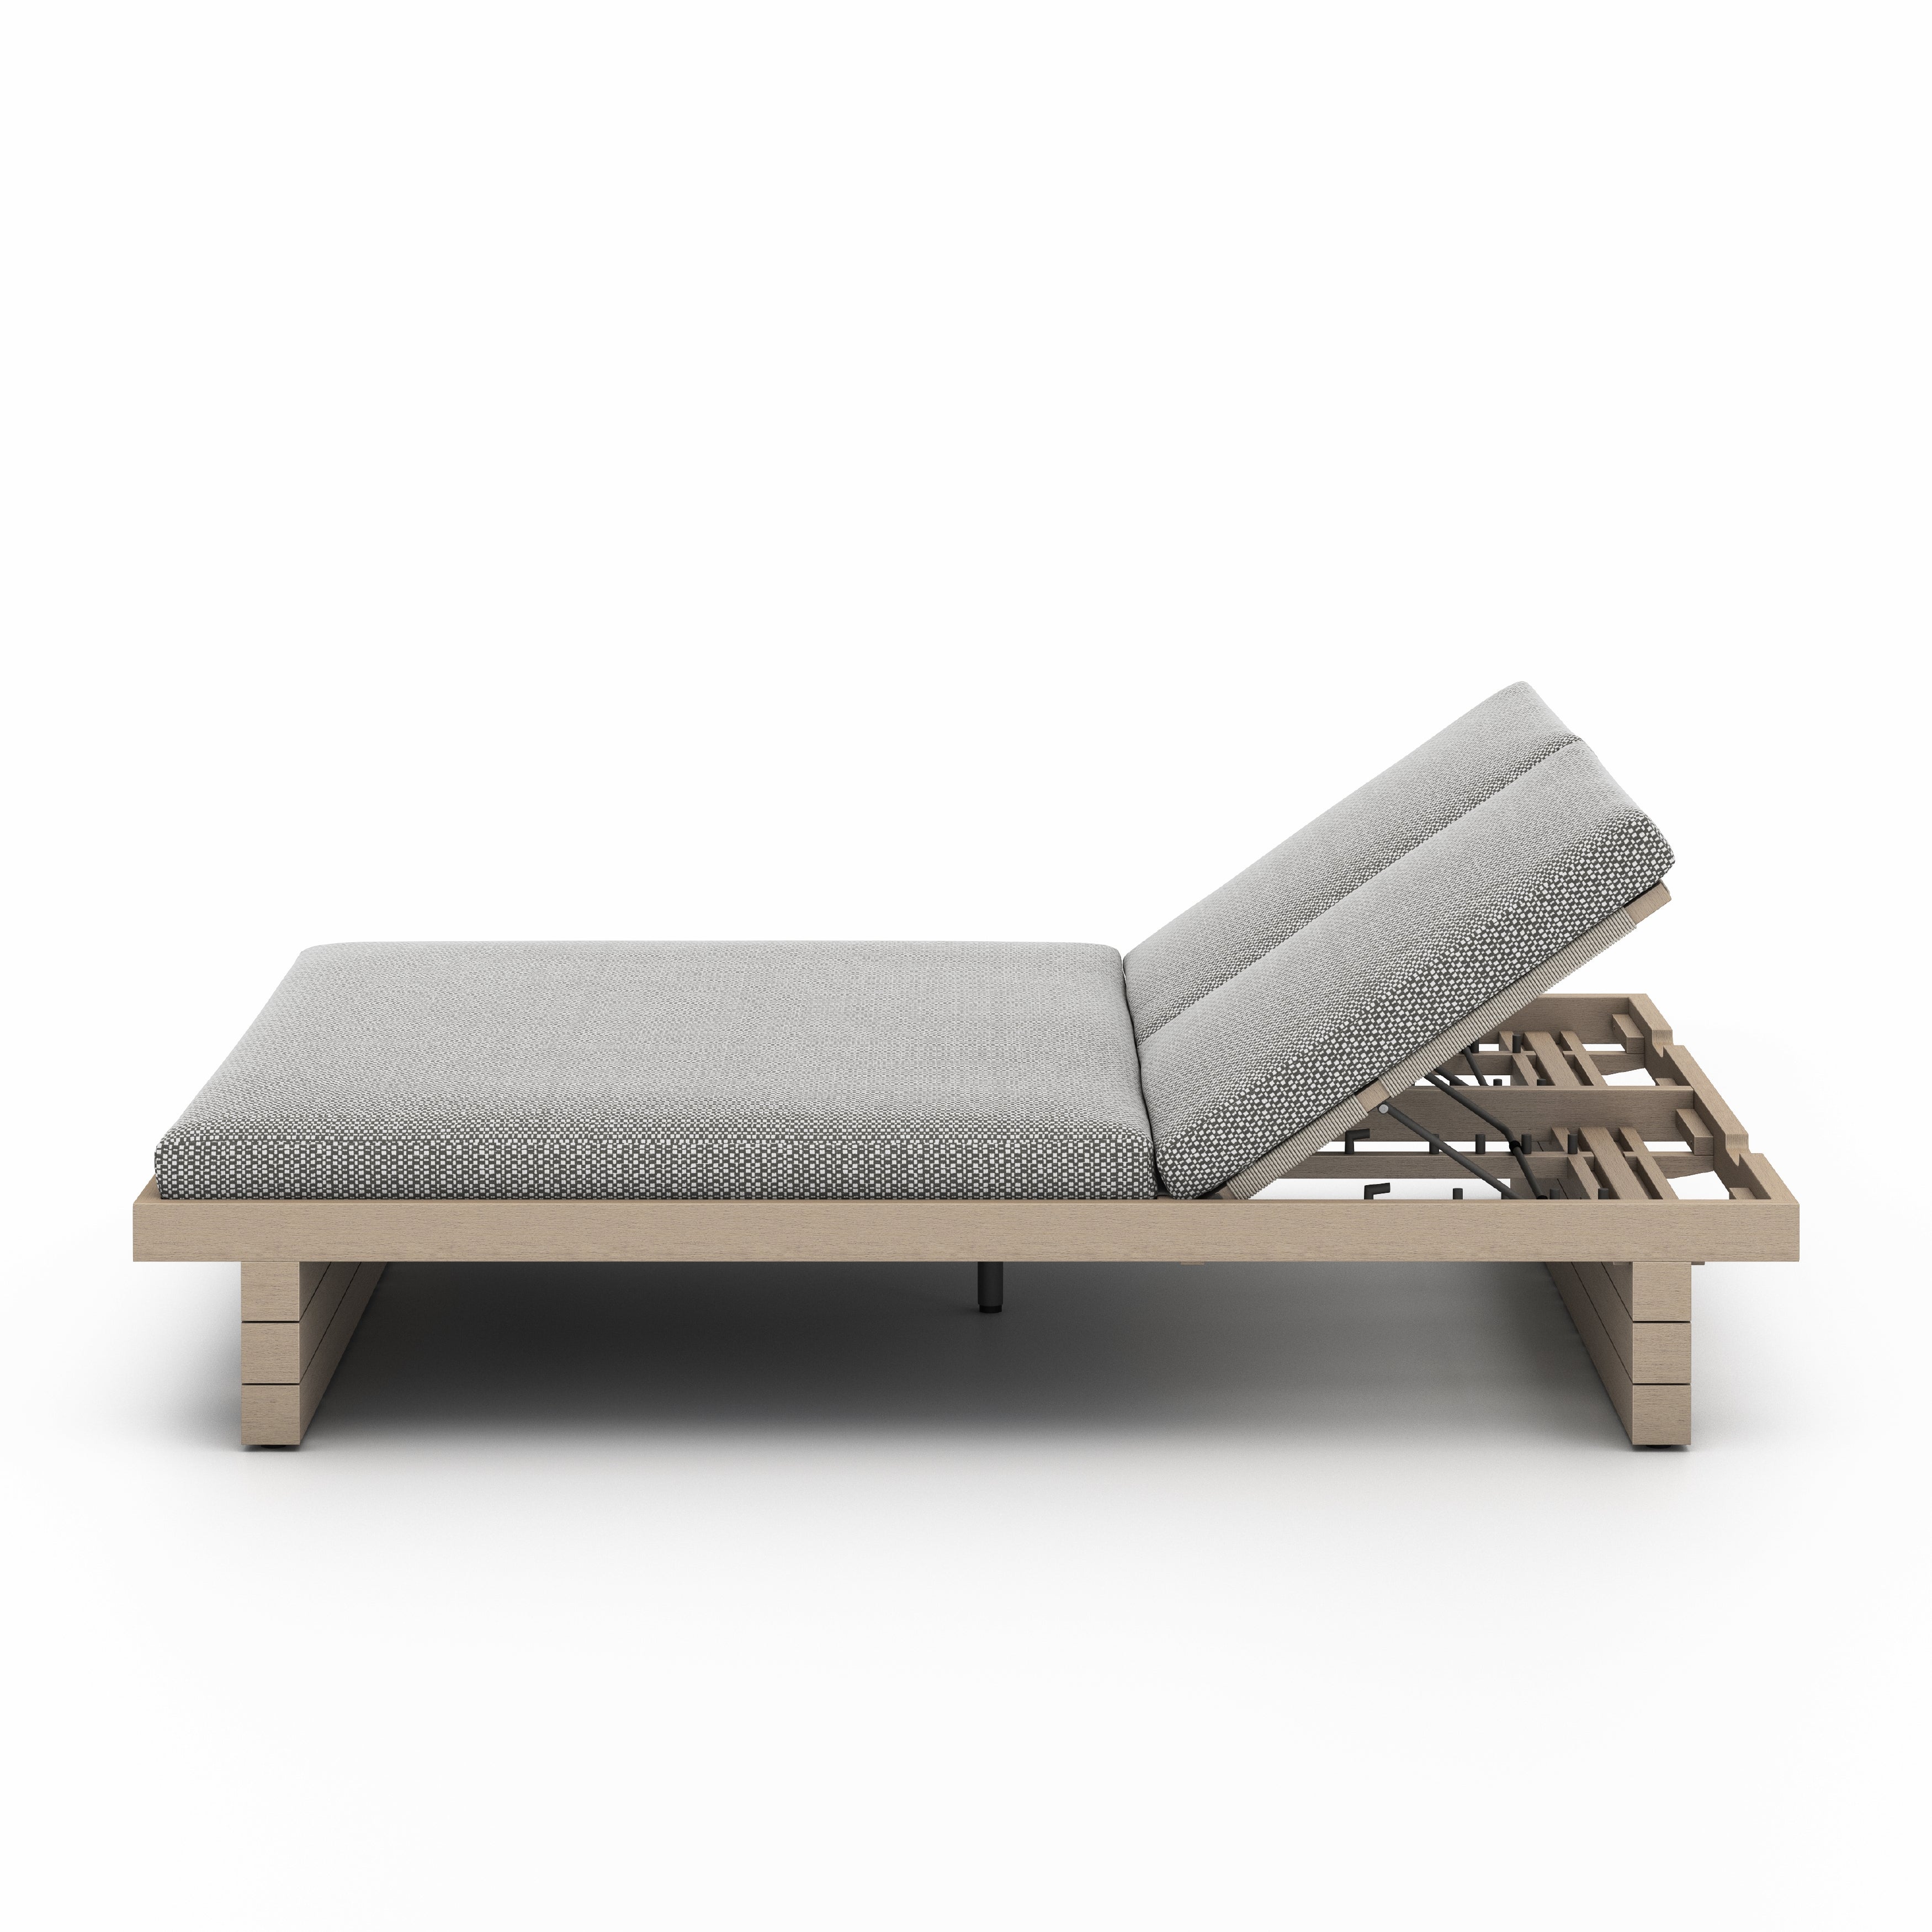 Leroy Outdoor Double Chaise